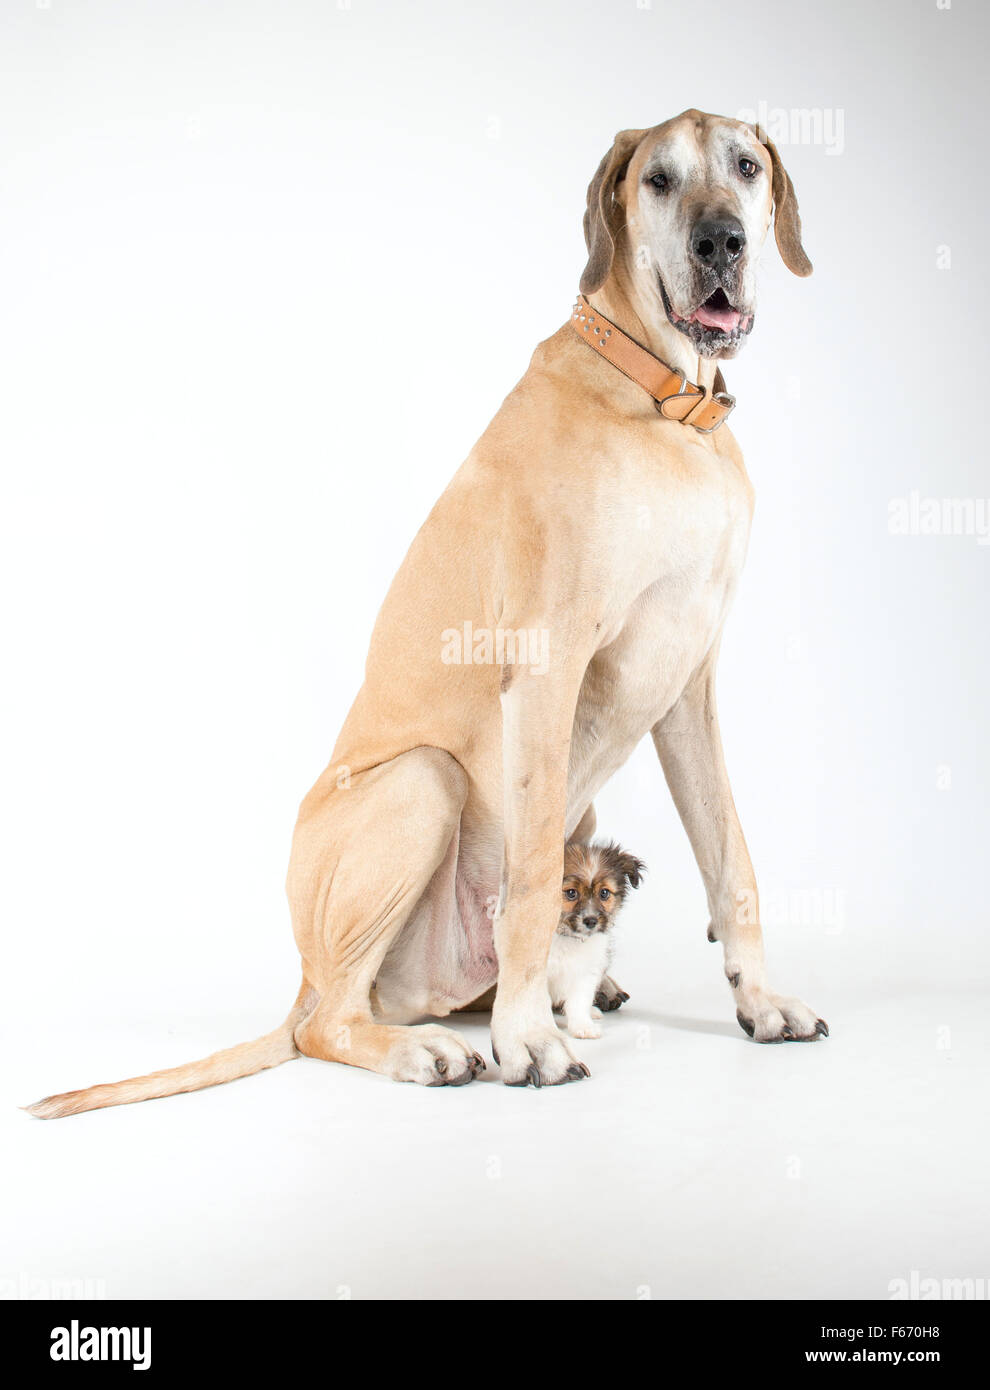 Minnie the Jack Russell puppy sheltering under Henry the old Great Dane Stock Photo